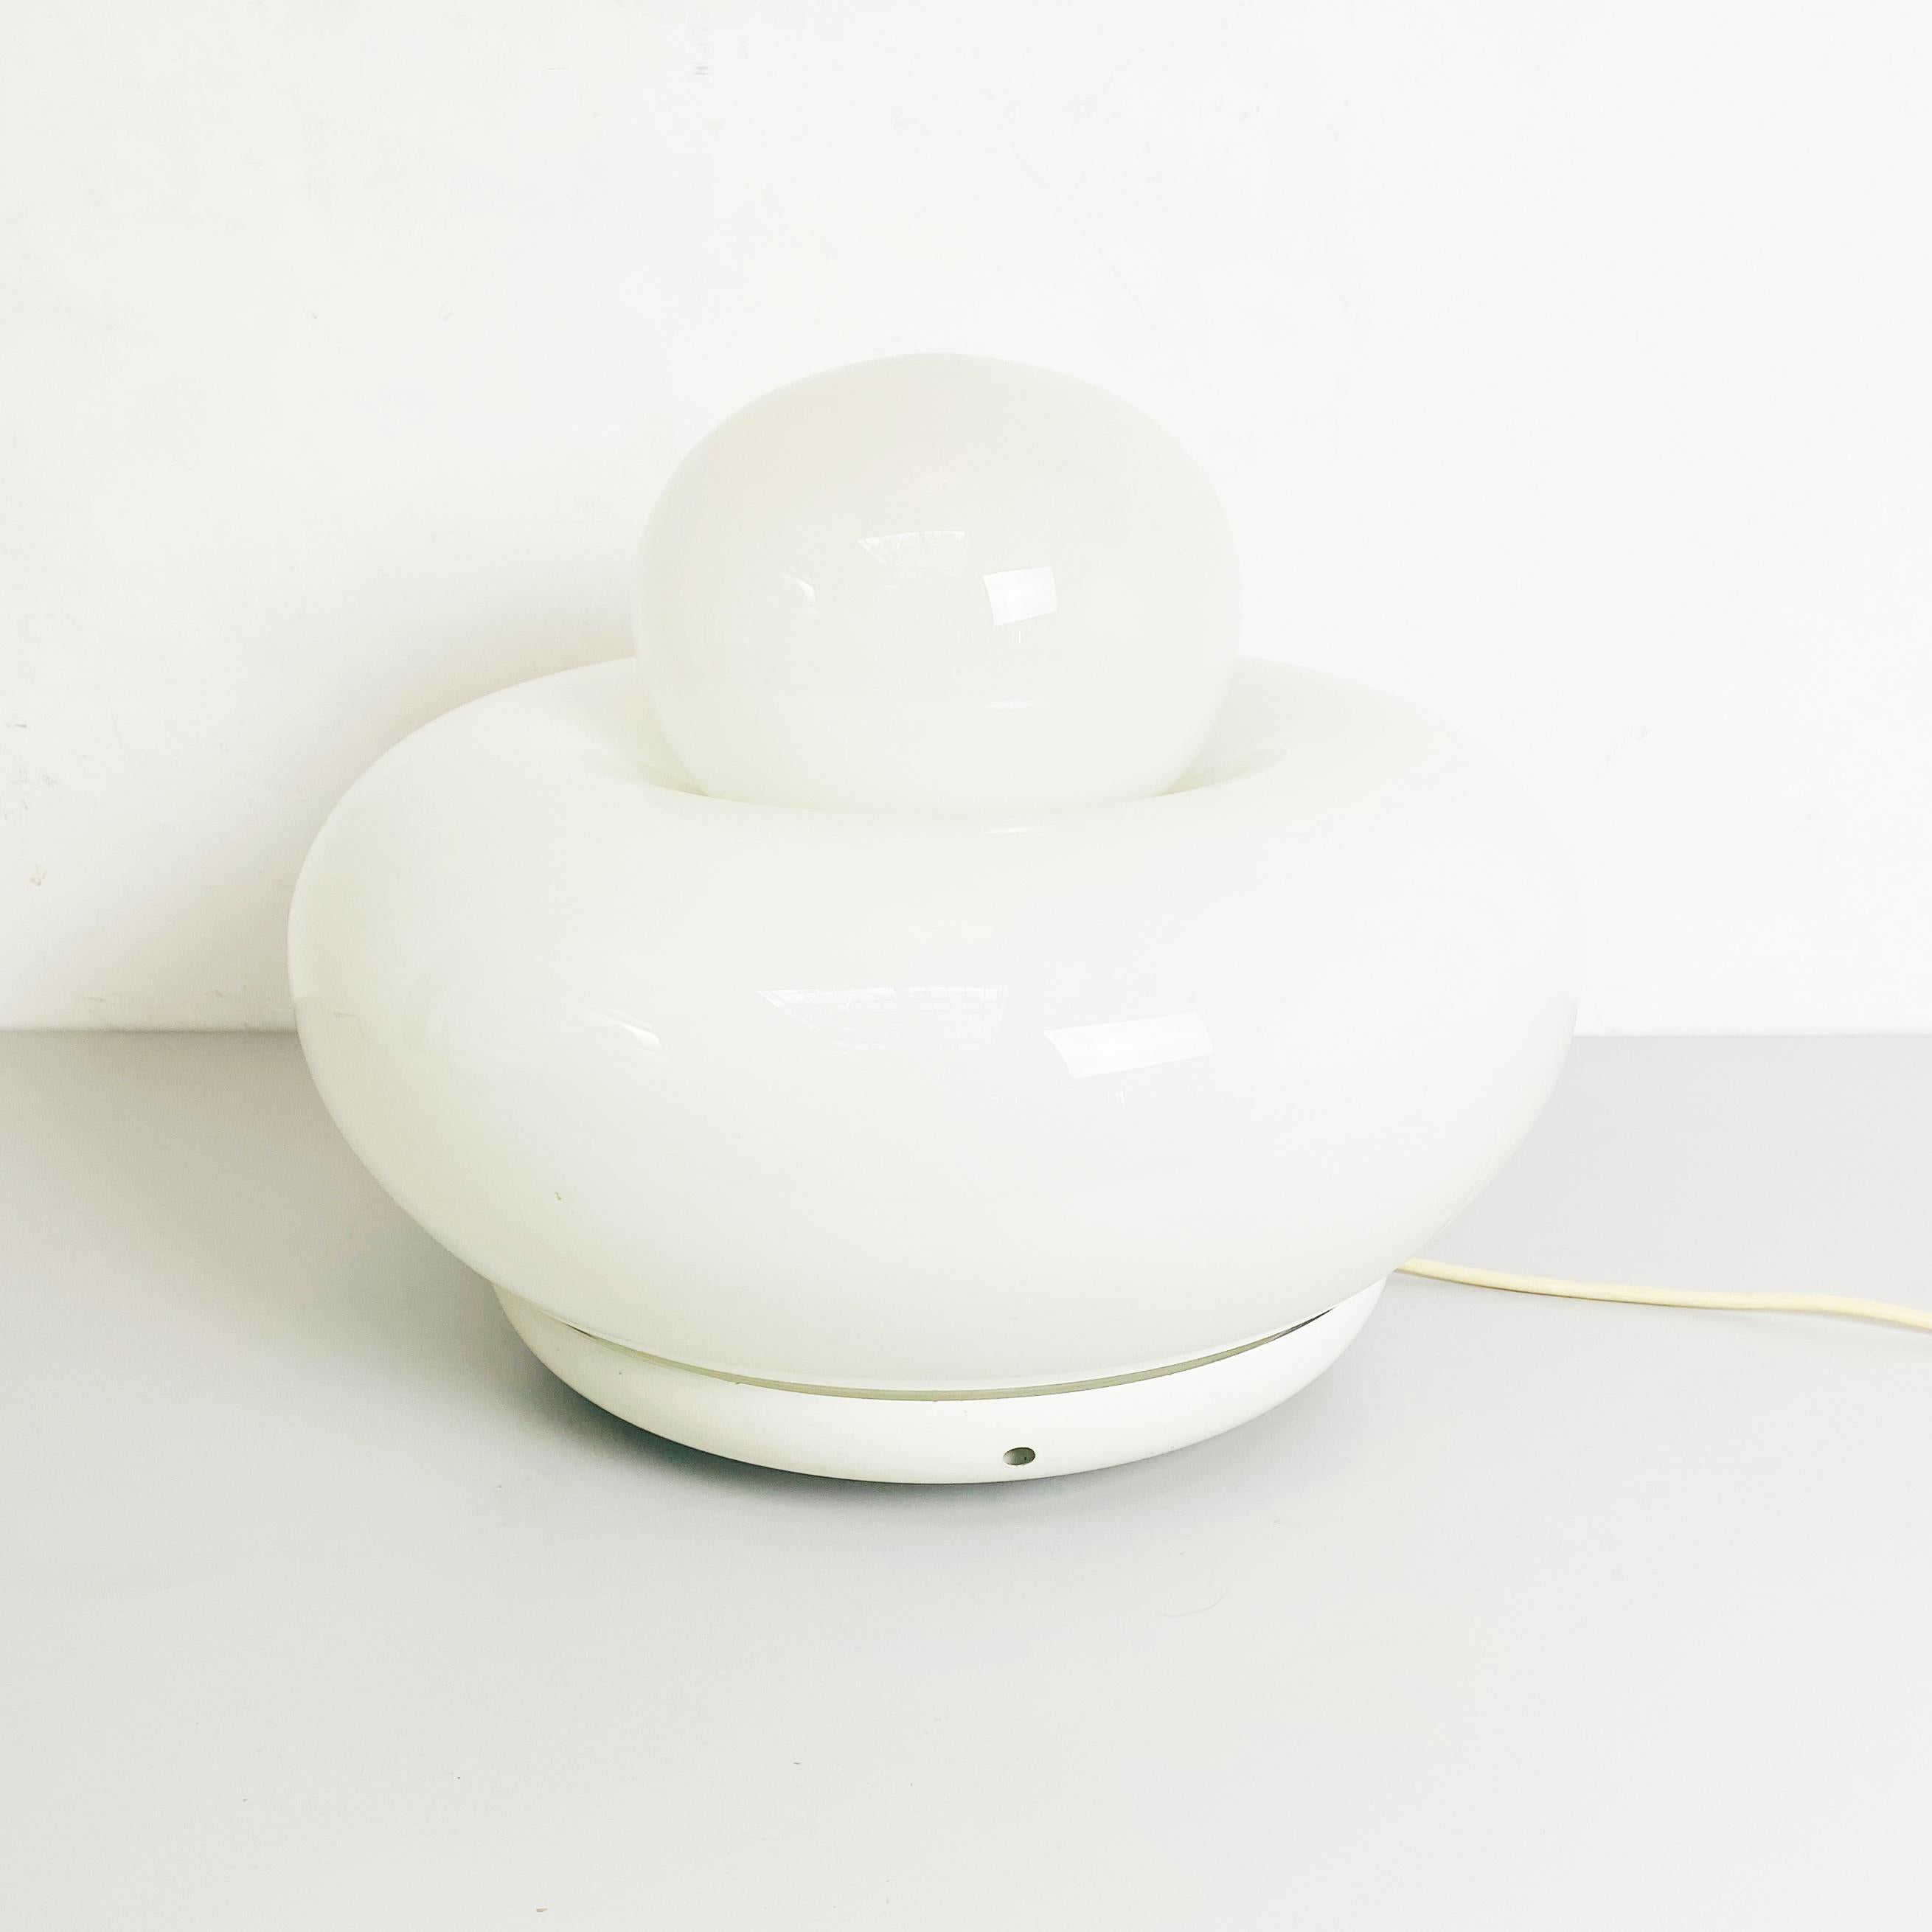 Italian Modern Electra Table Lamp by Giuliana Gramigna for Artemide, 1968 For Sale 3